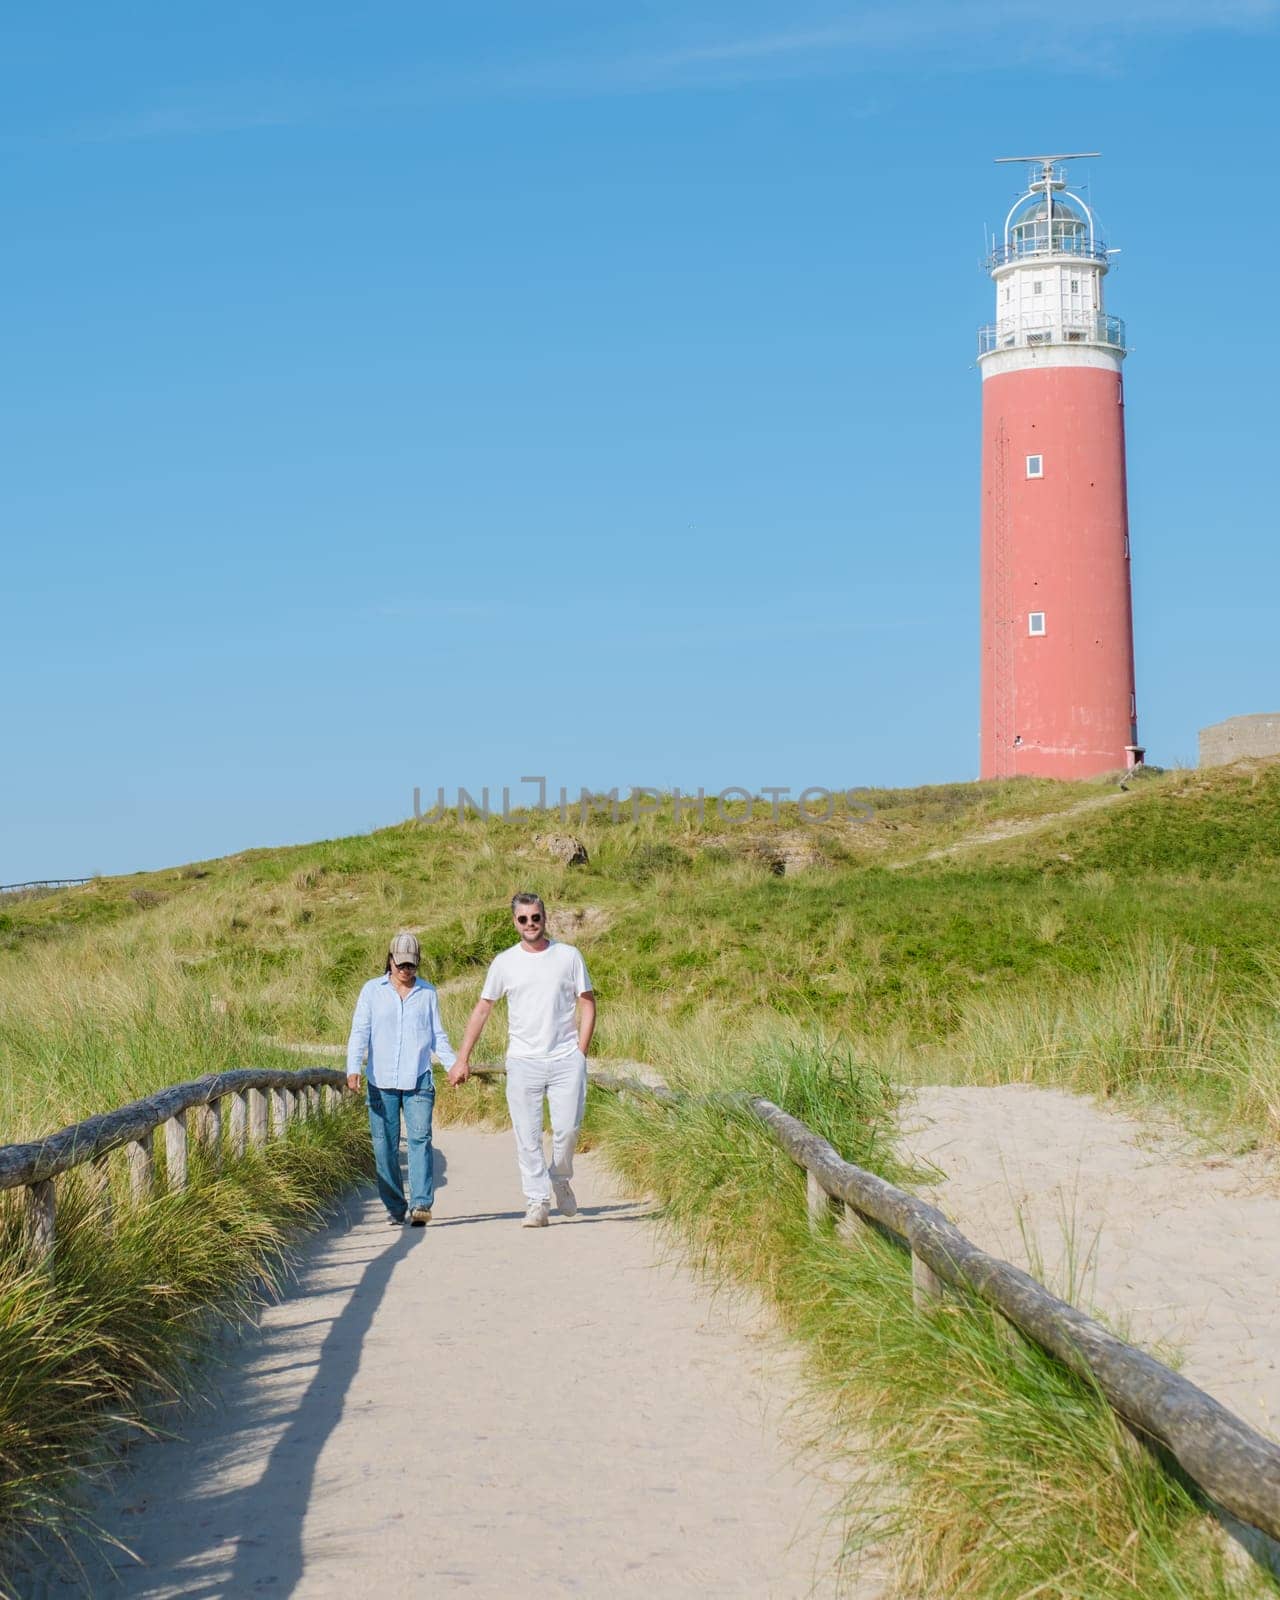 A couple strolling along a path by a stunning lighthouse in Texel, Netherlands, enjoying the scenic view and the peaceful surroundings.